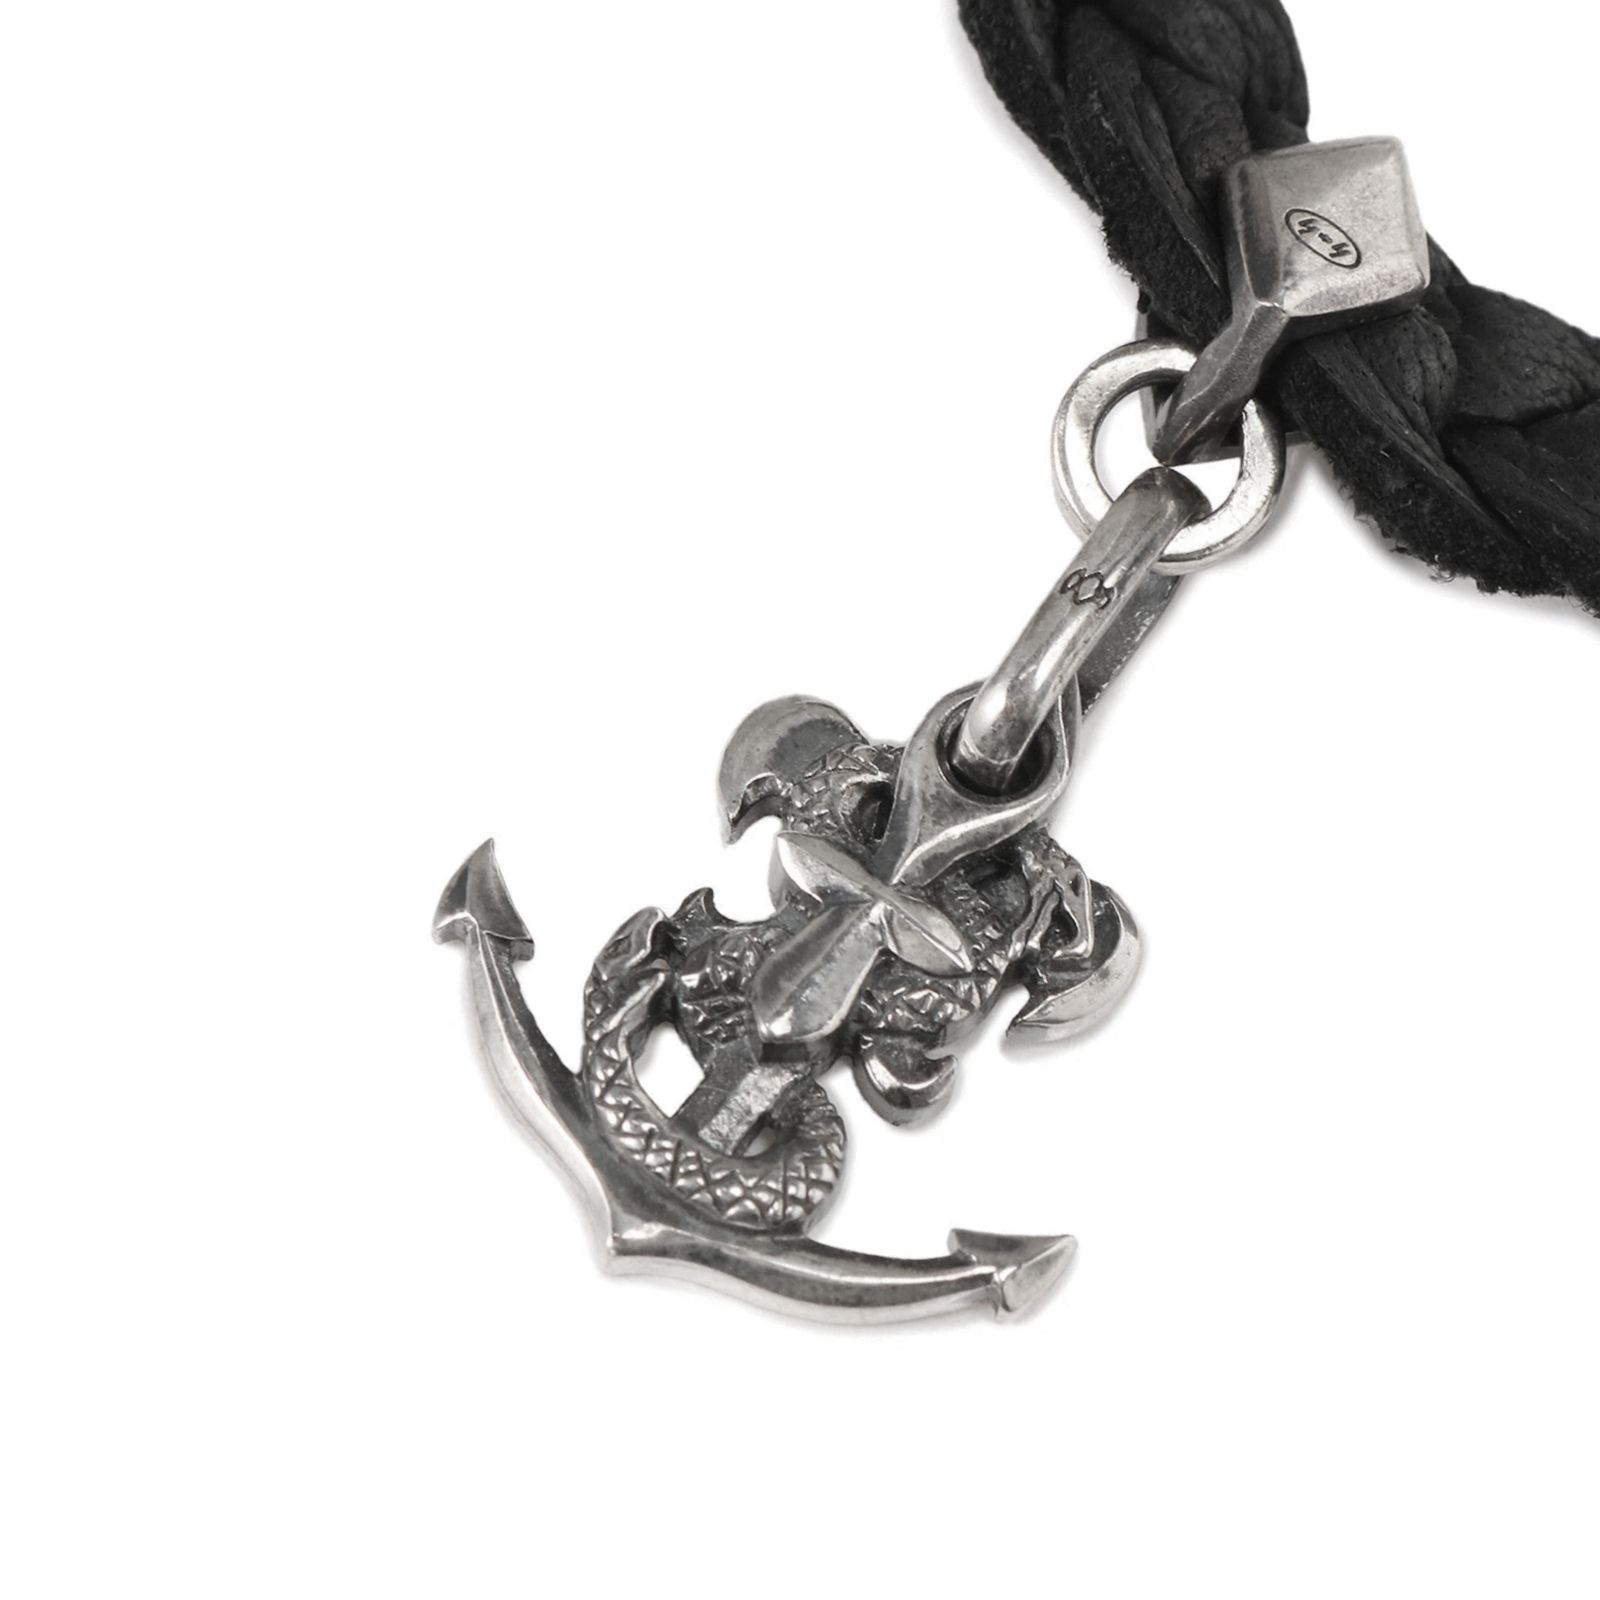 GOTHIC YOHJI YAMAMOTO - GOTHIC YOHJI YAMAMOTO ANCHORCHARM LEATHER